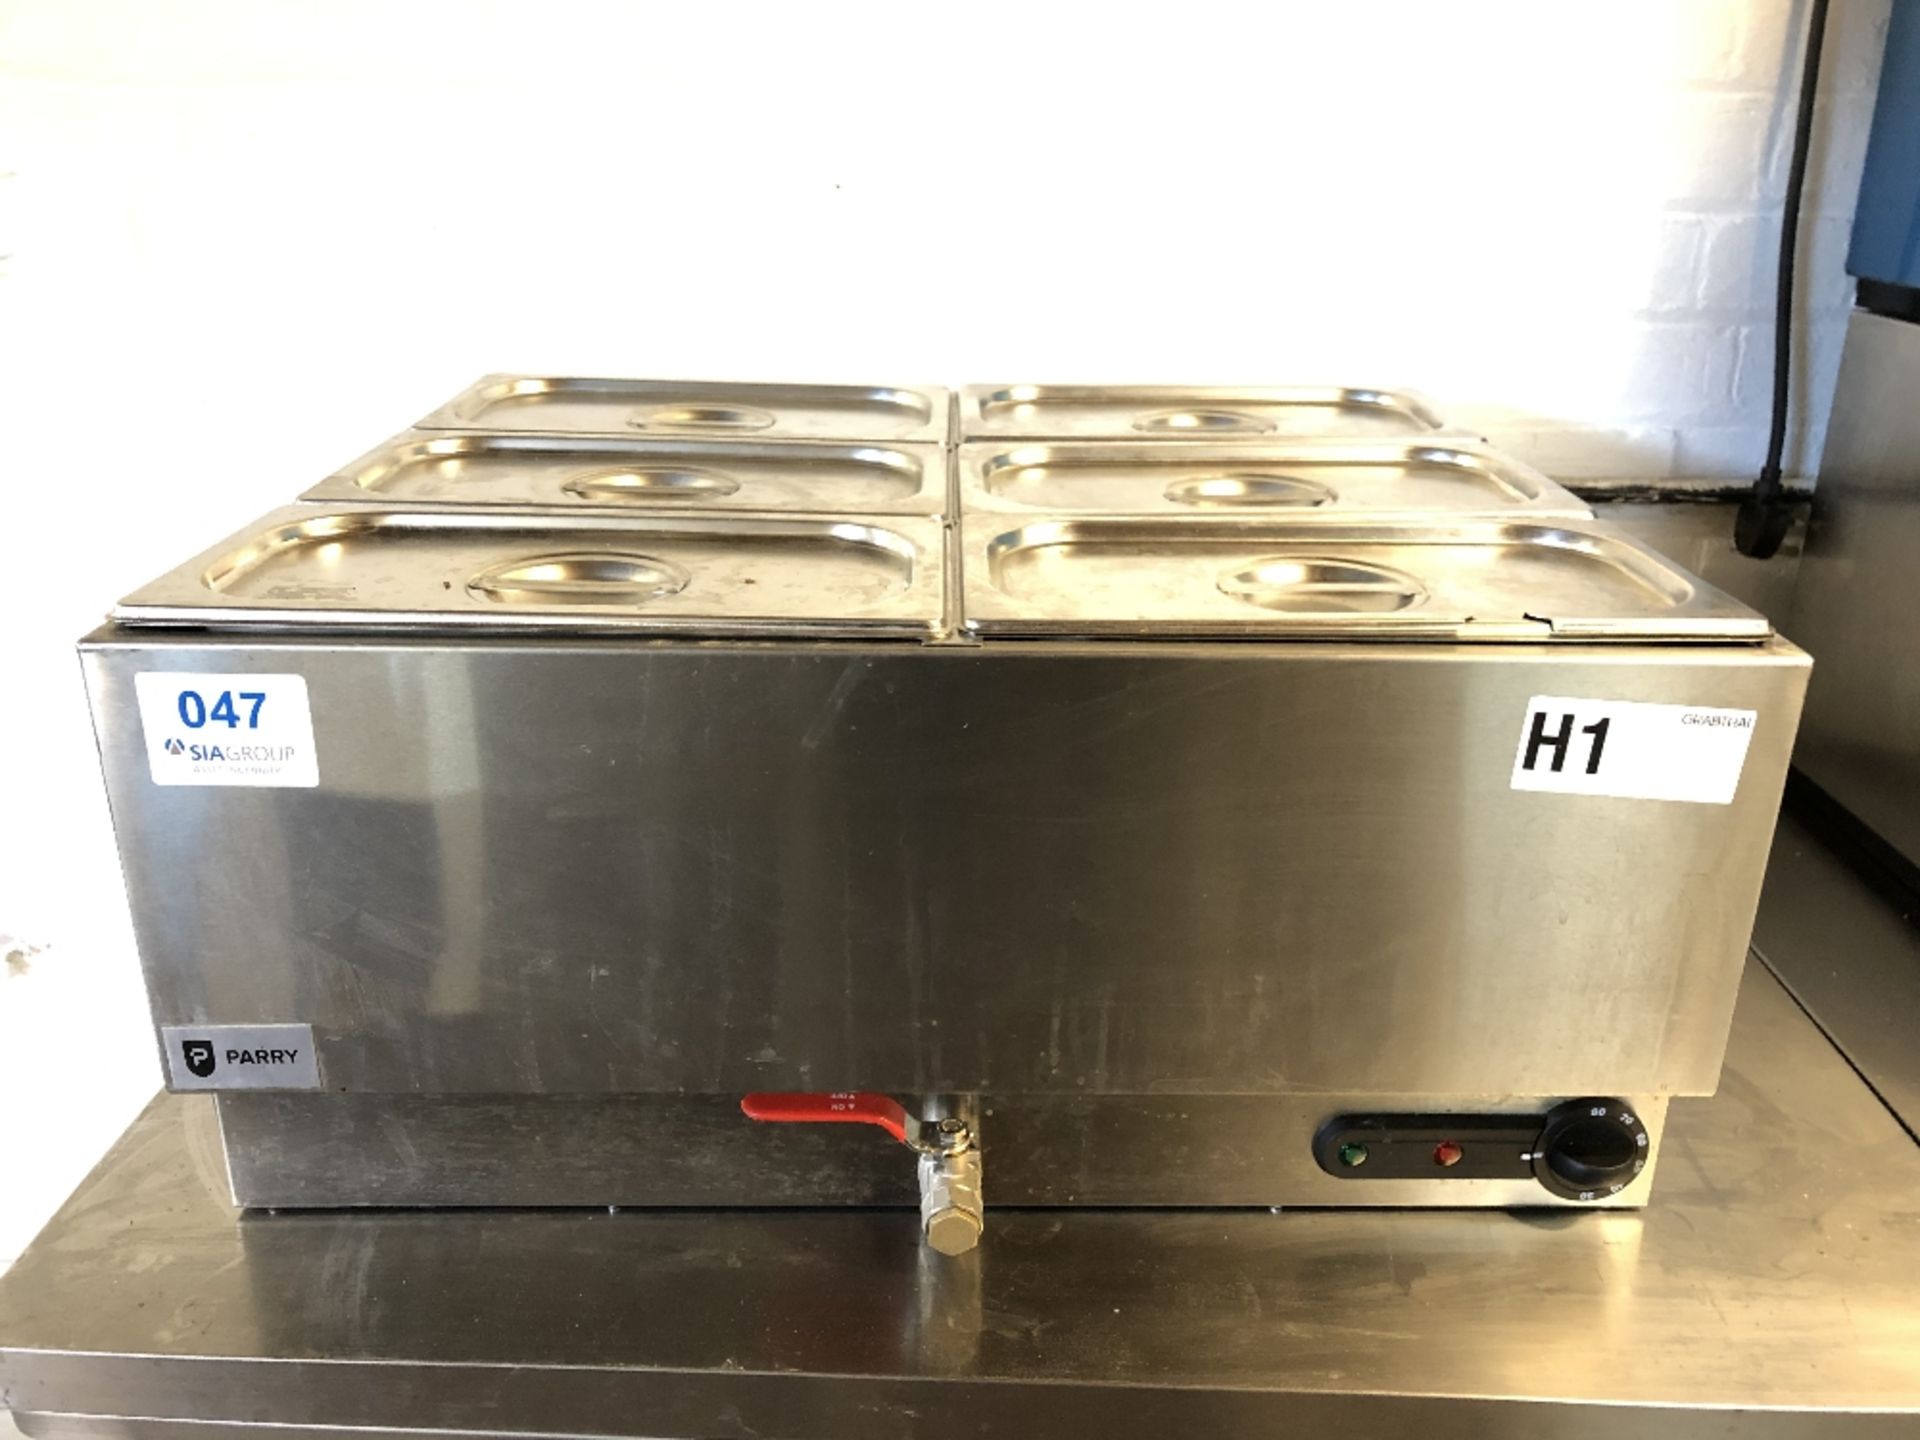 Parry 1985 Stainless Steel Wet Heat Electric Gastronorm Bain Marie